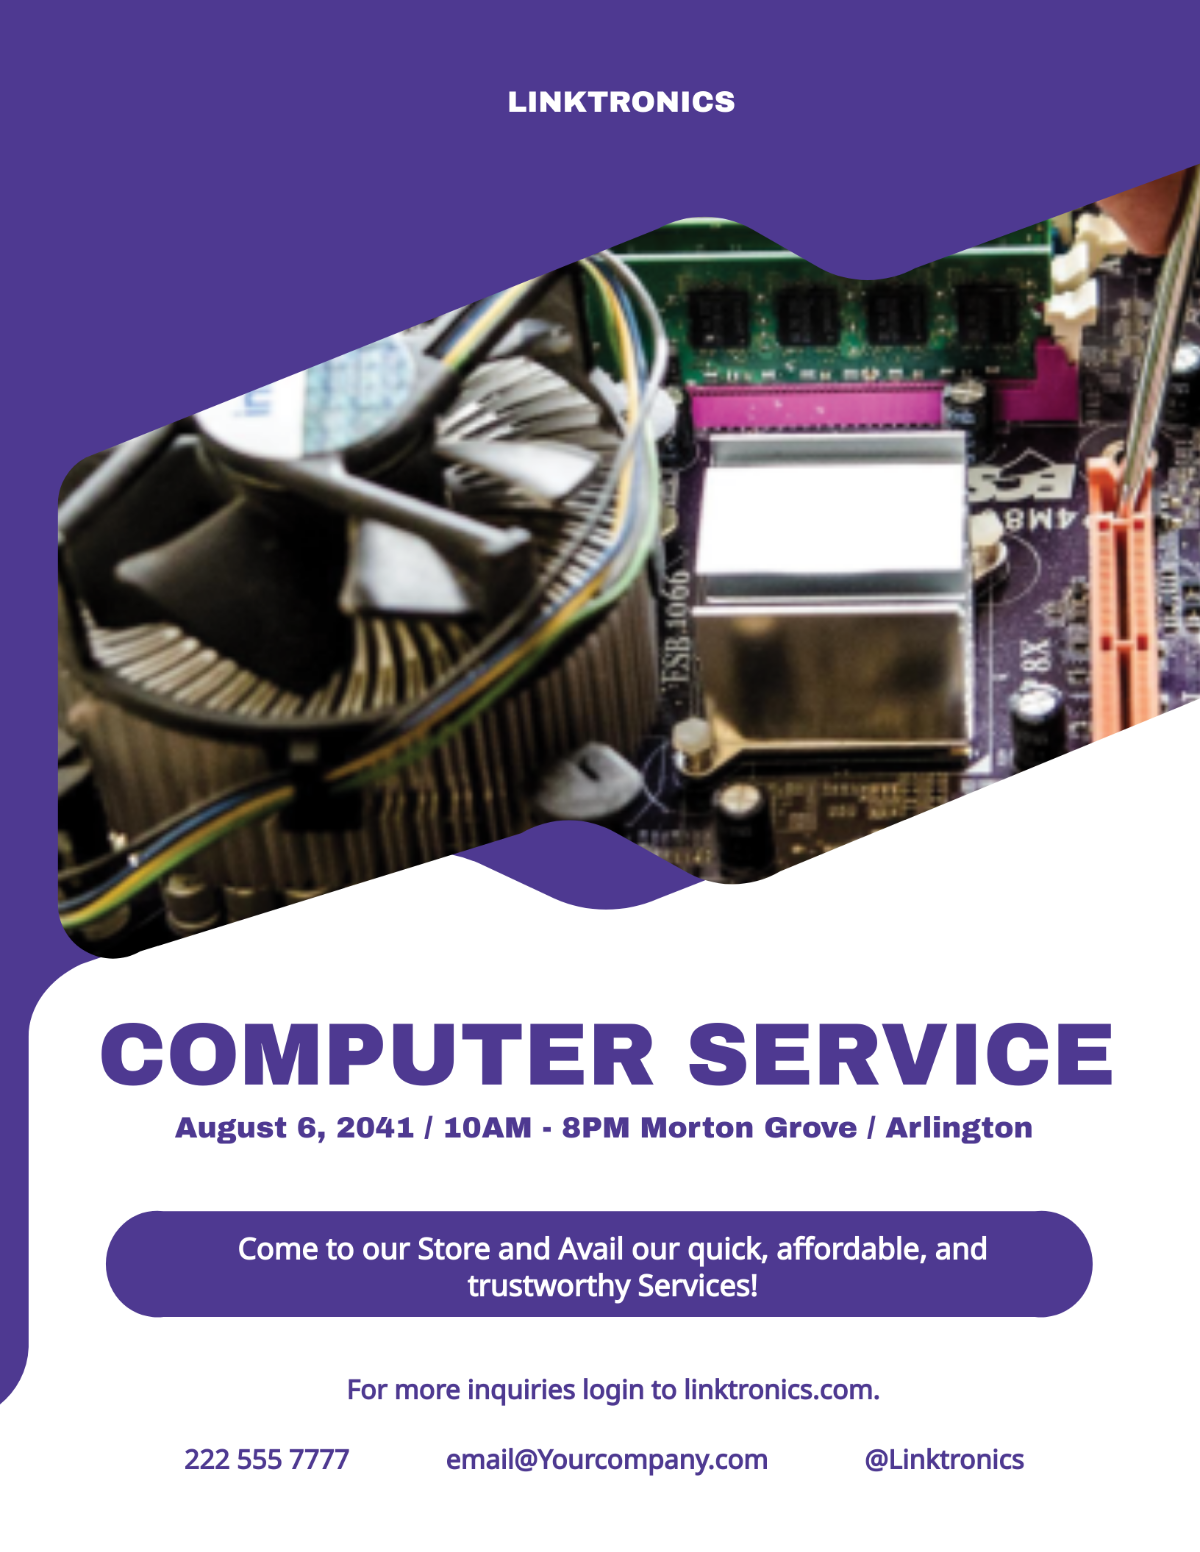 Computer Repair Services Flyer Template